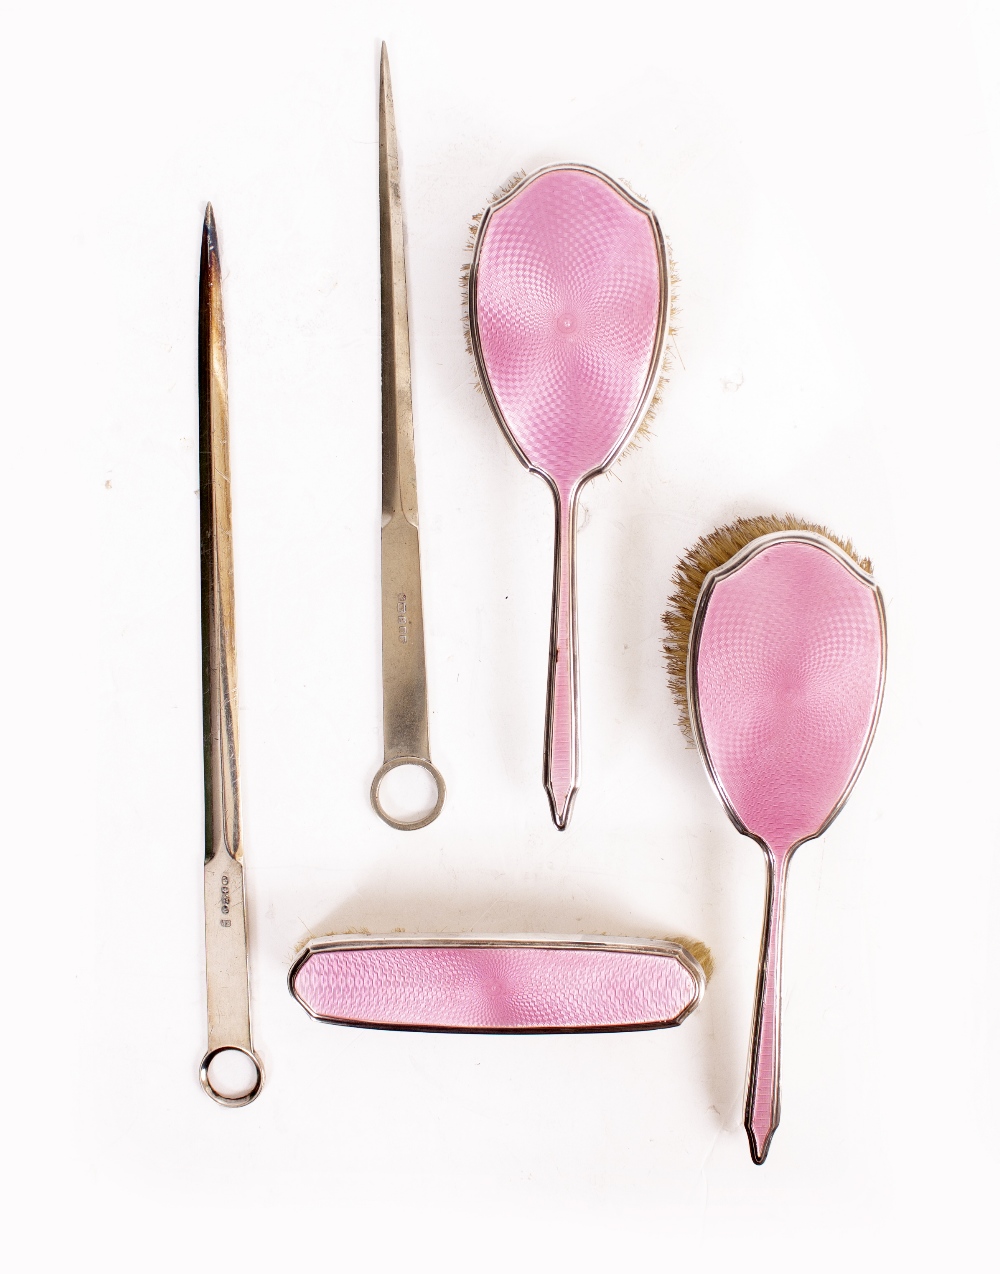 A MAPPIN & WEBB THREE PIECE SILVER PINK ENAMELLED DRESSING TABLE SET consisting of three brushes